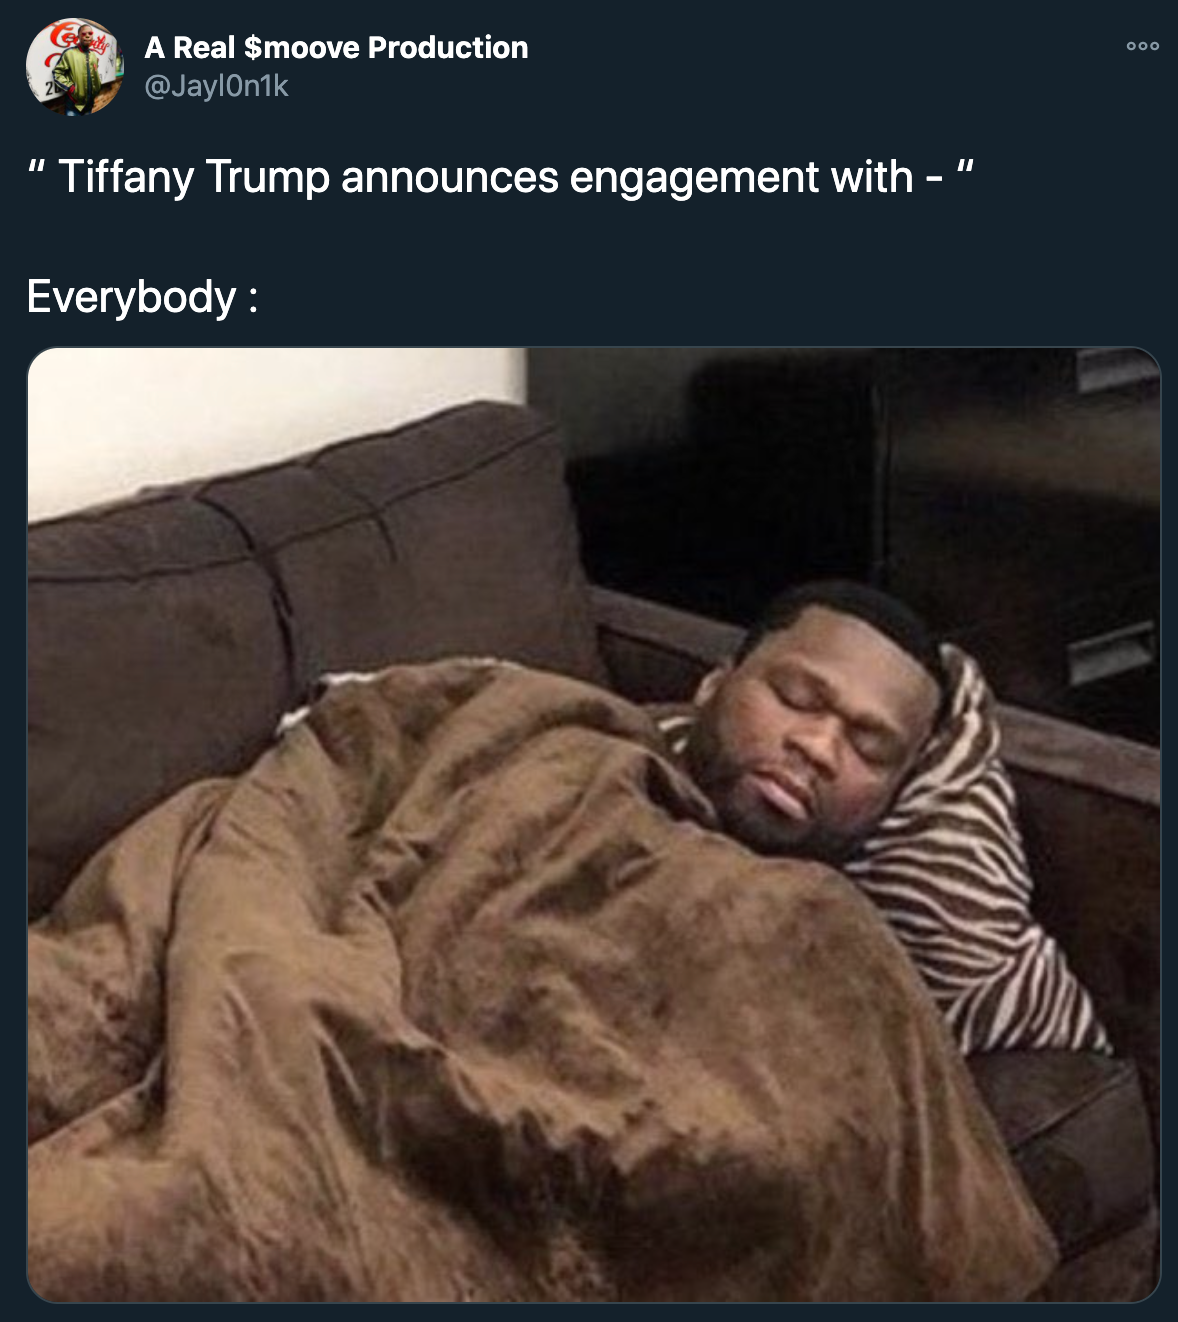 tiffany trump engagement - tiffany trump announces engagement with everybody 50 cent asleep meme